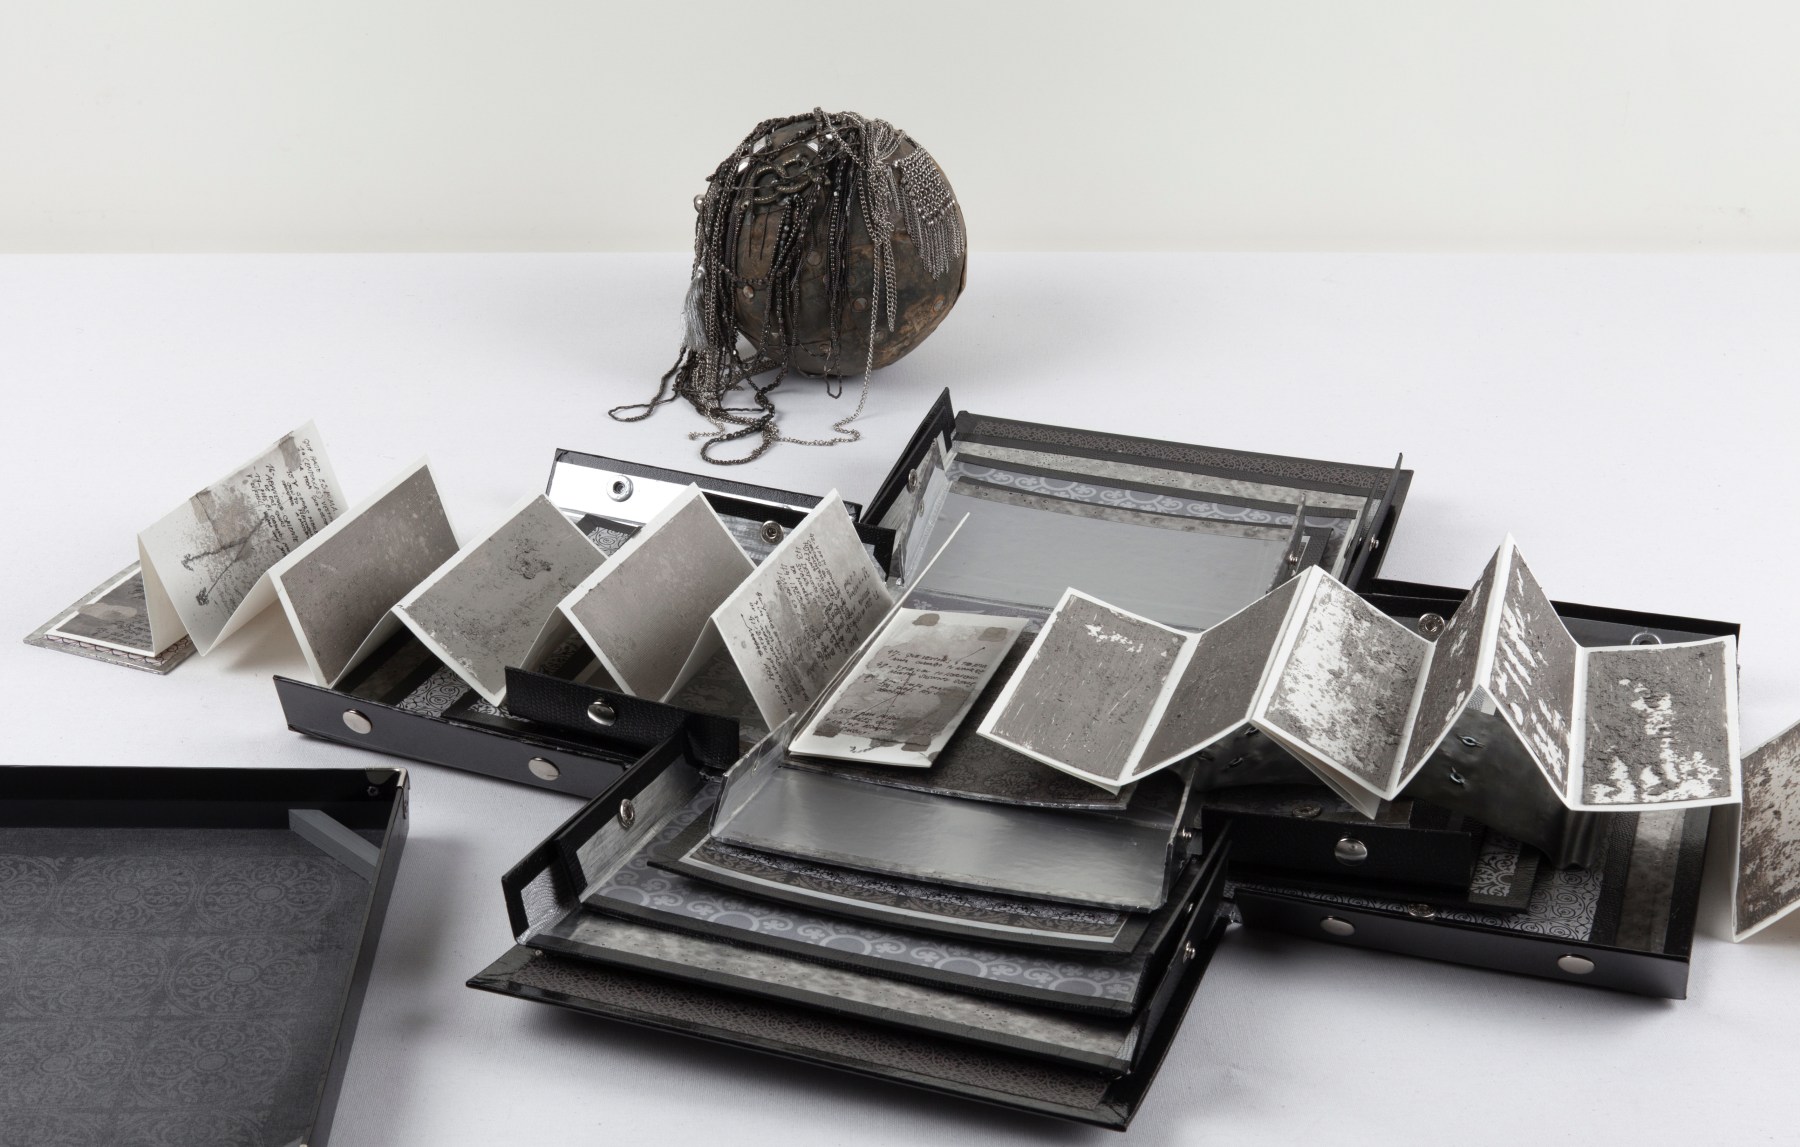 Silver, 2011 Aged silver metallic paper, paper, lead, necklaces, chain, bell, trinkets, one leporello book